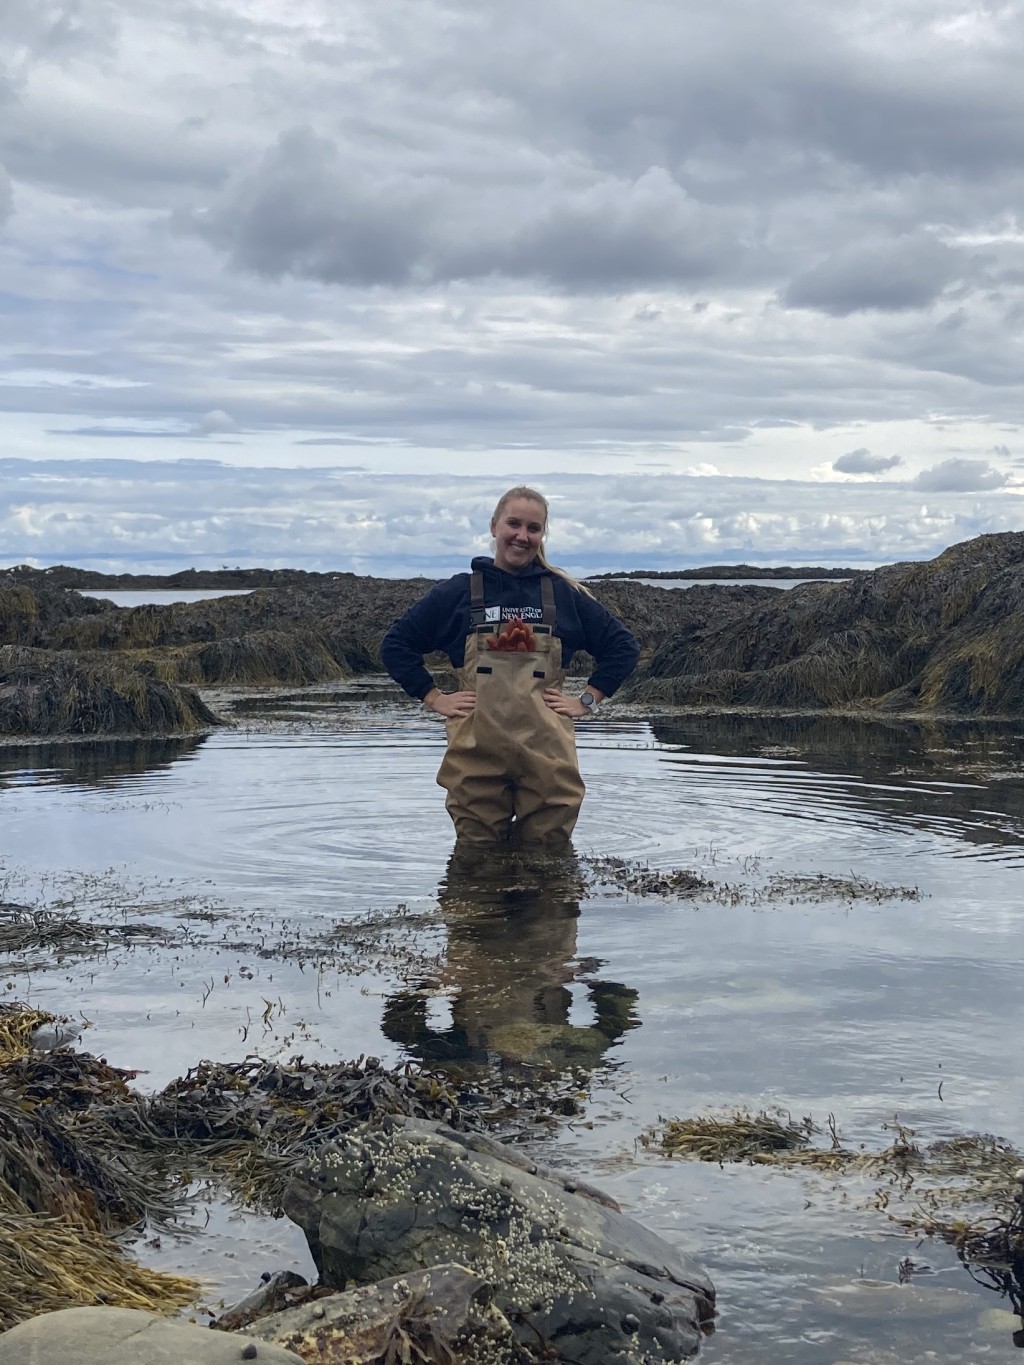 U N E student Melissa Butler stands in a tide pool wearing waiters